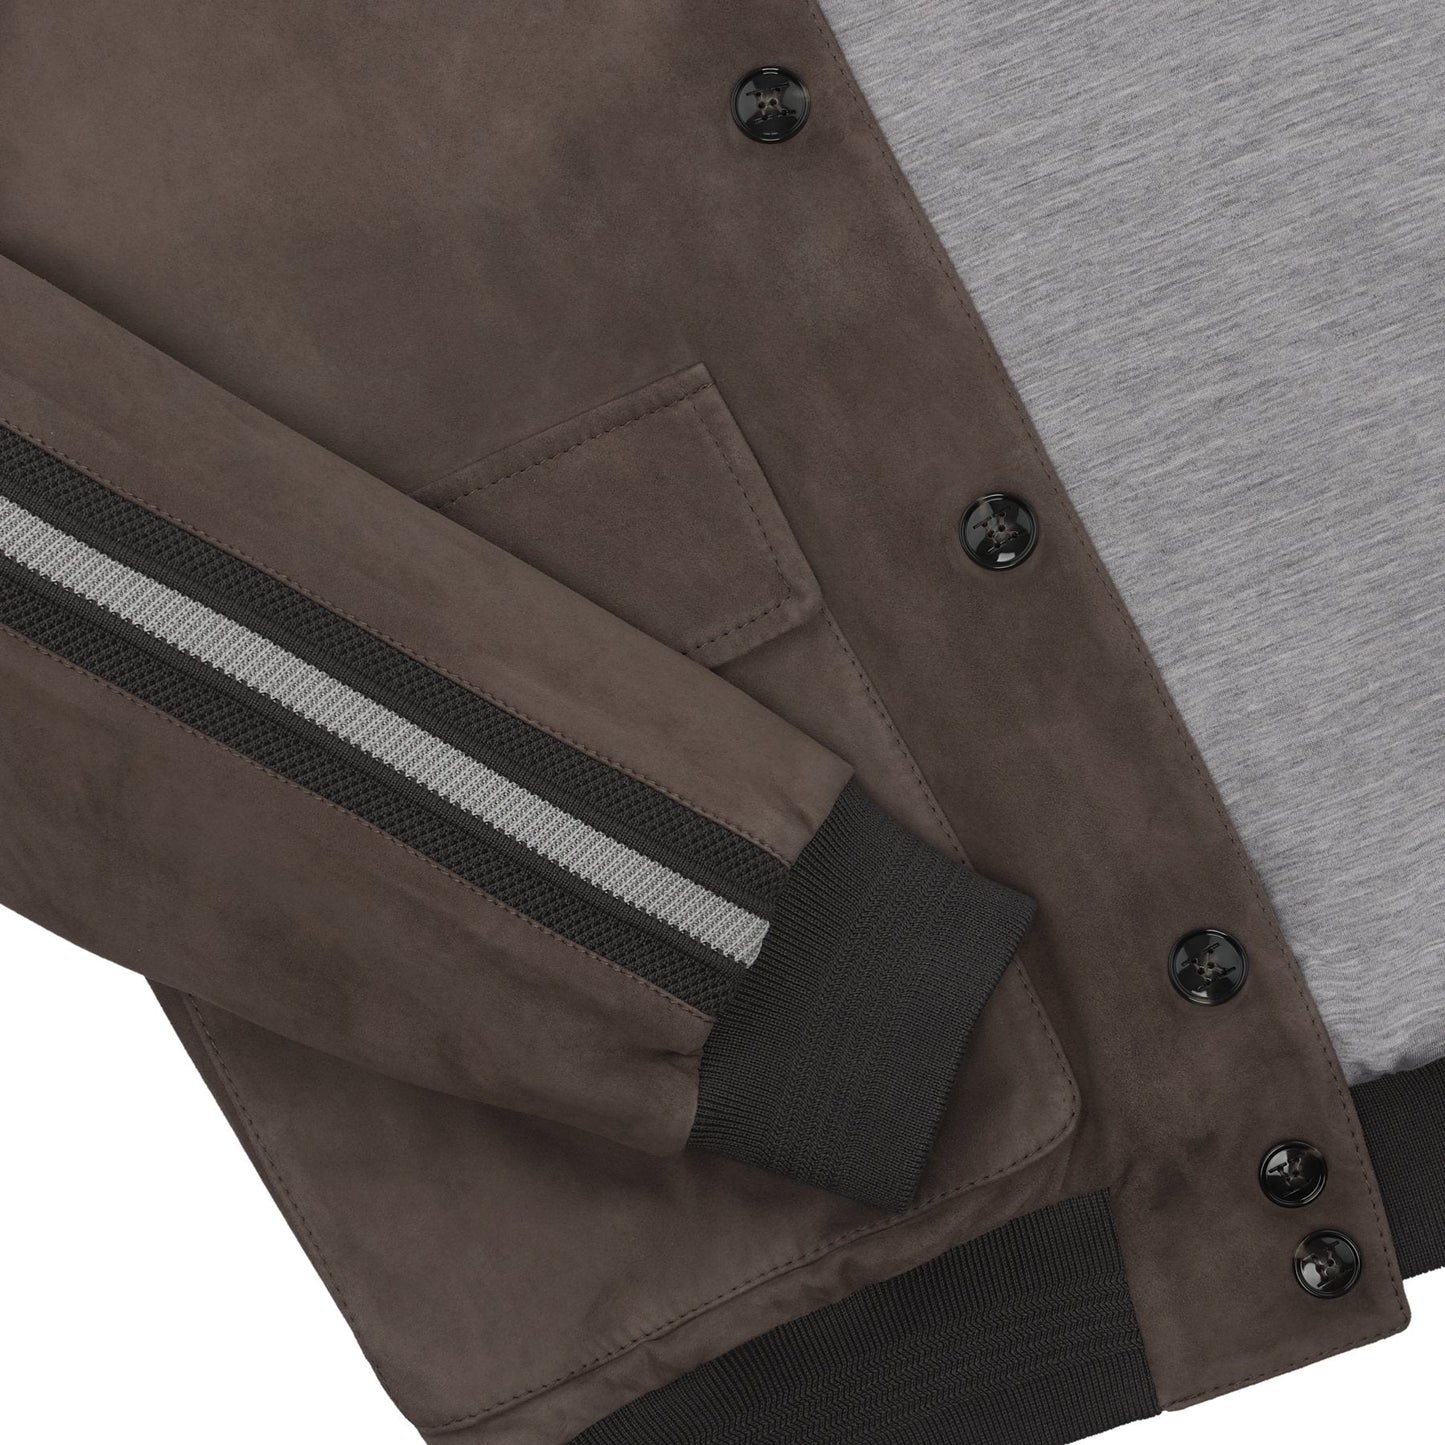 Kiton Suede Bomber Jacket in Taupe - SARTALE